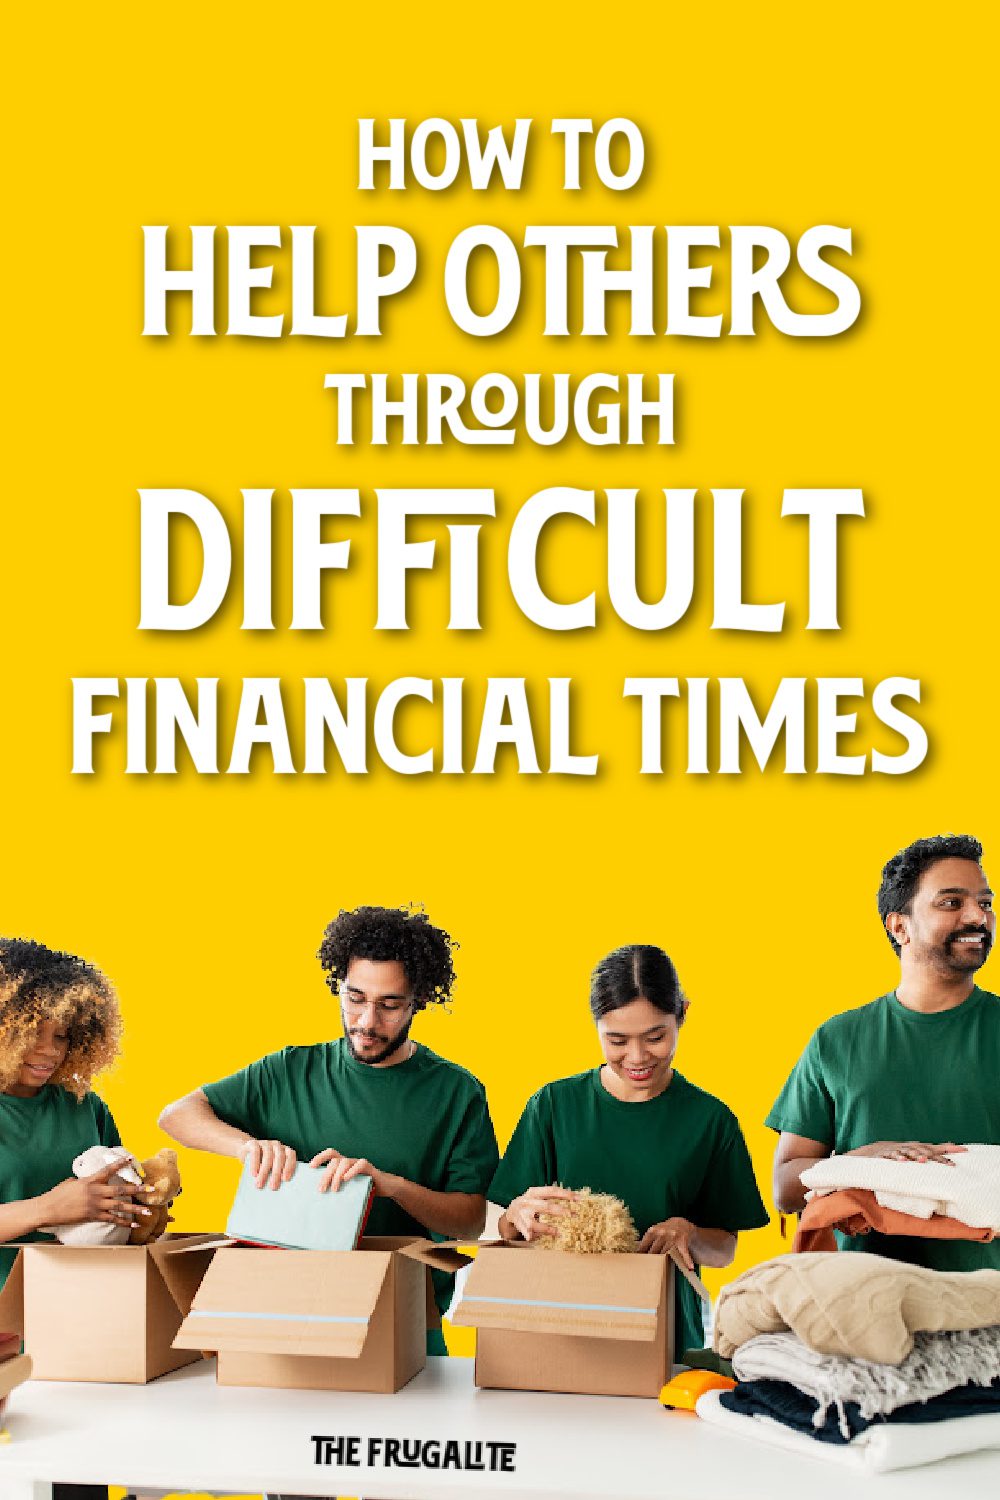 How To Help Others Through Difficult Financial Times